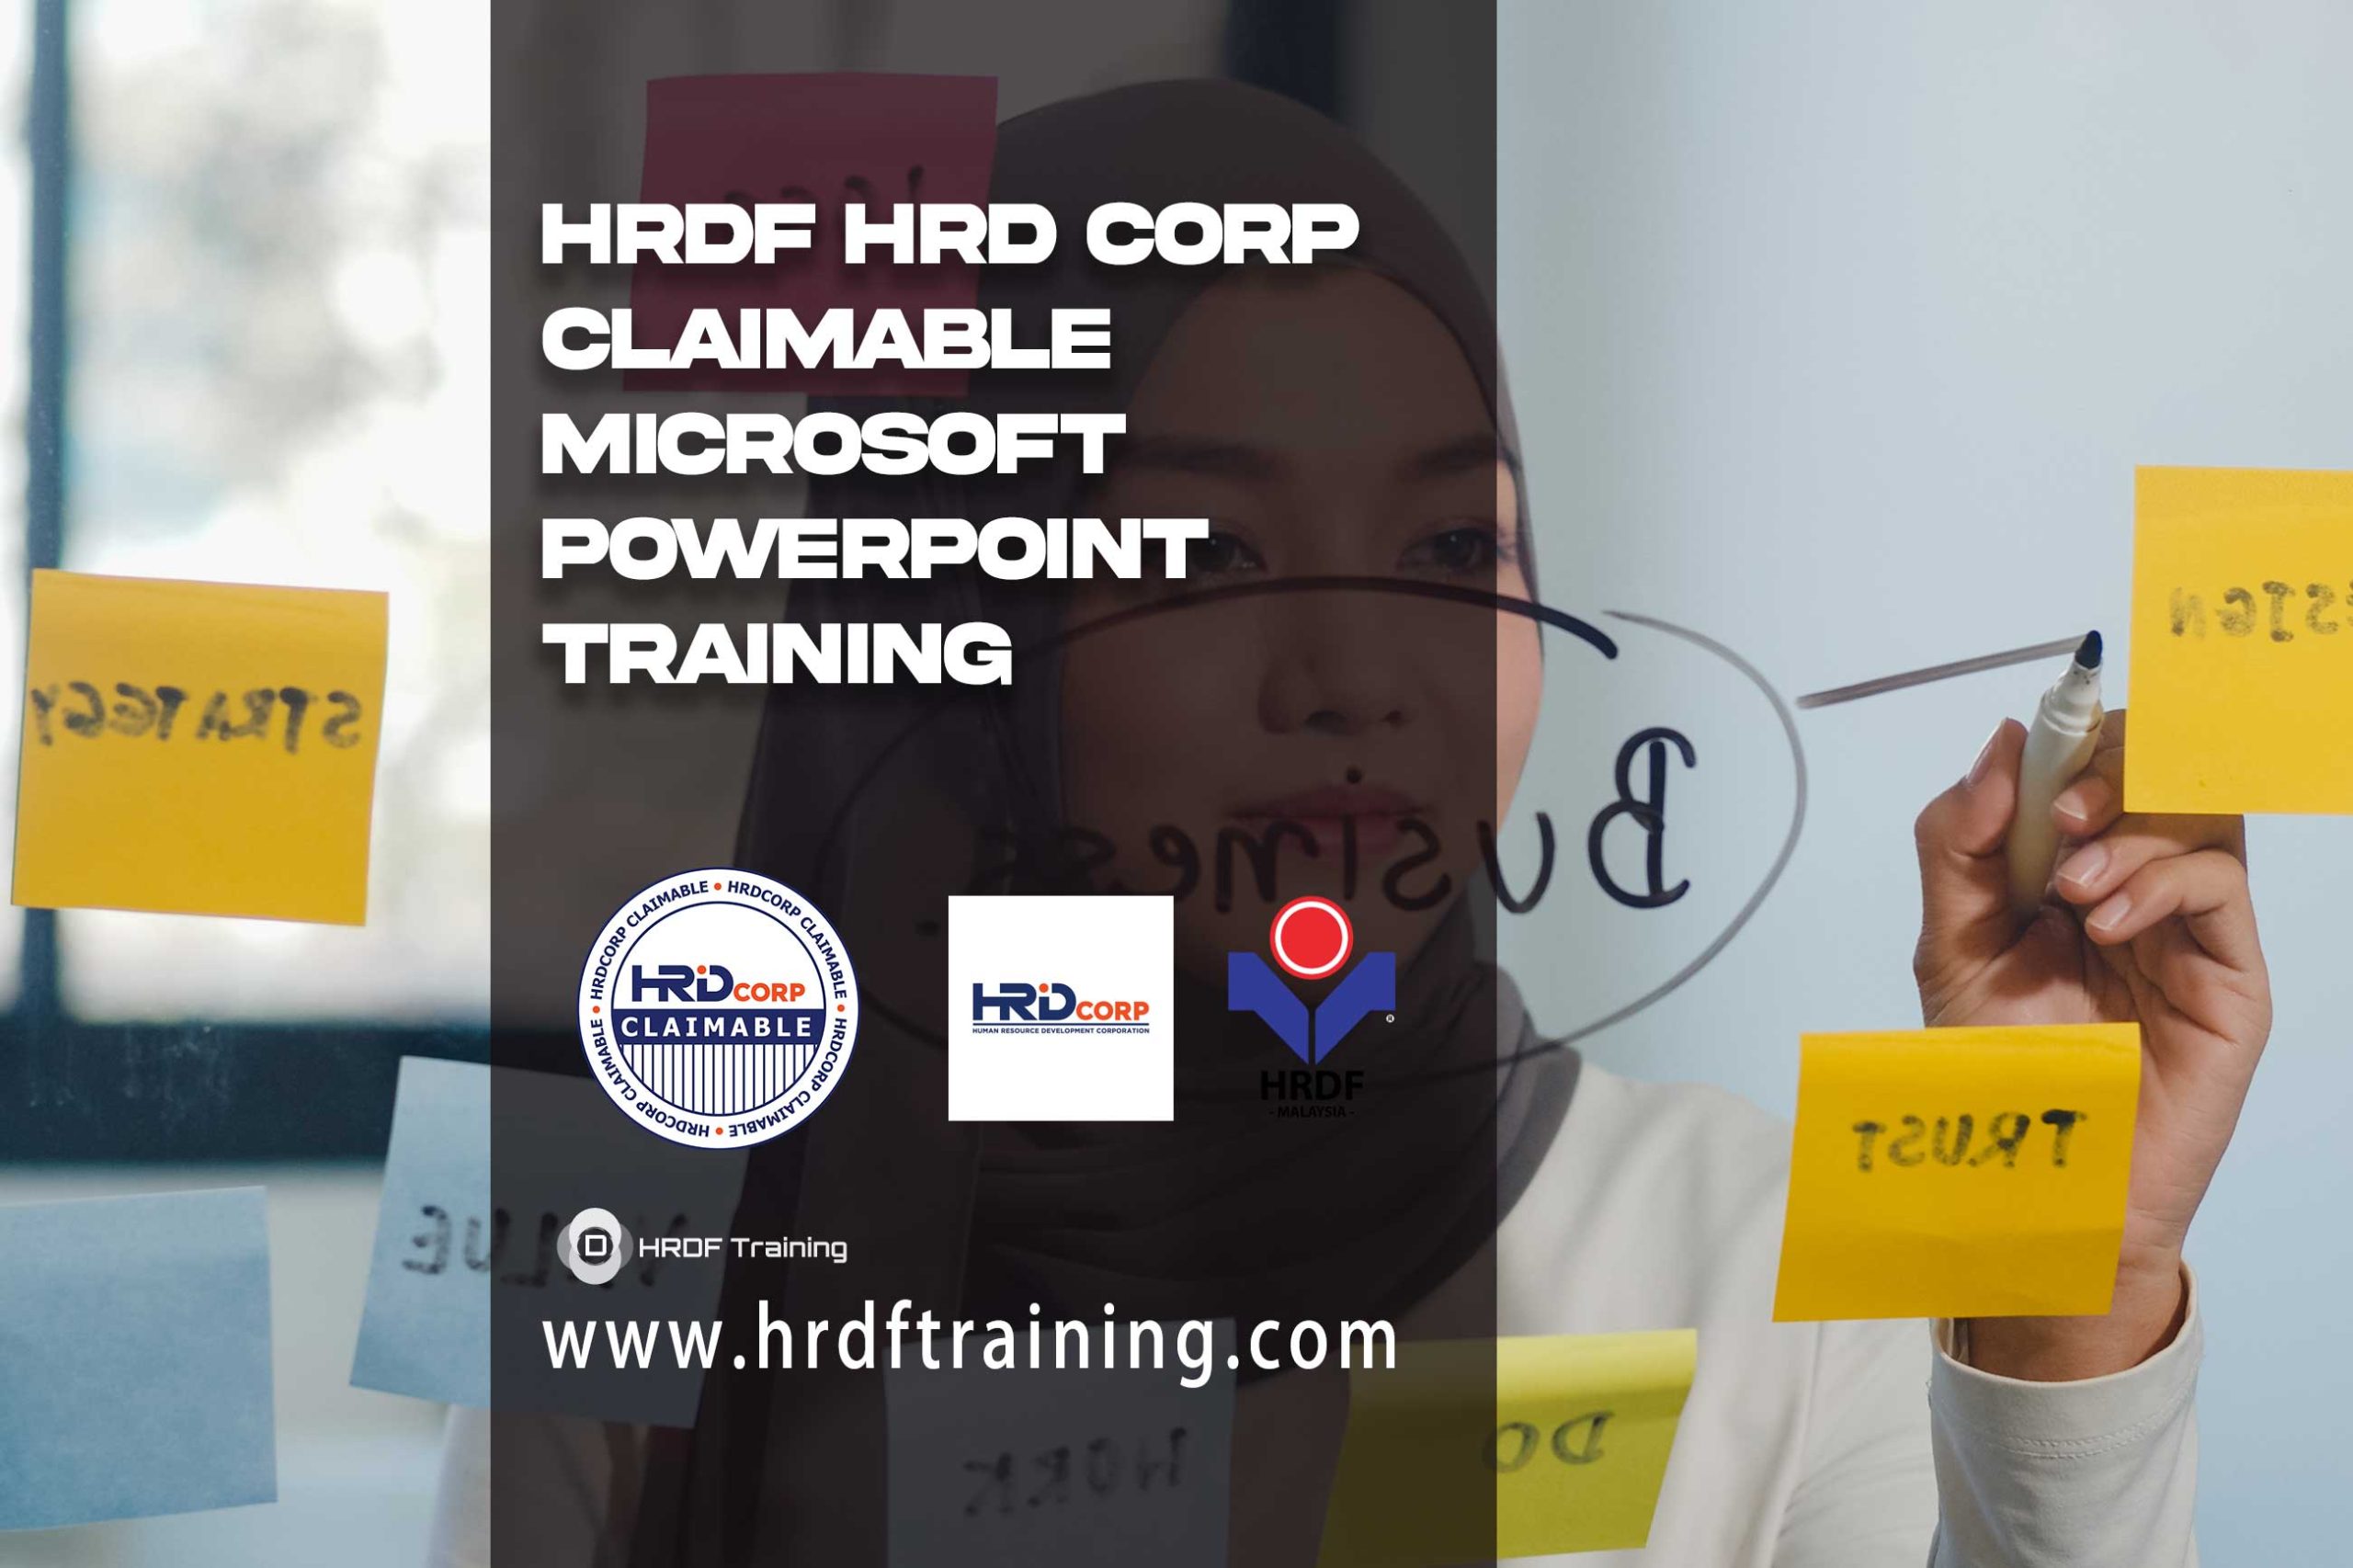 HRDF-HRD-Corp-Claimable-Microsoft-PowerPoint-Training